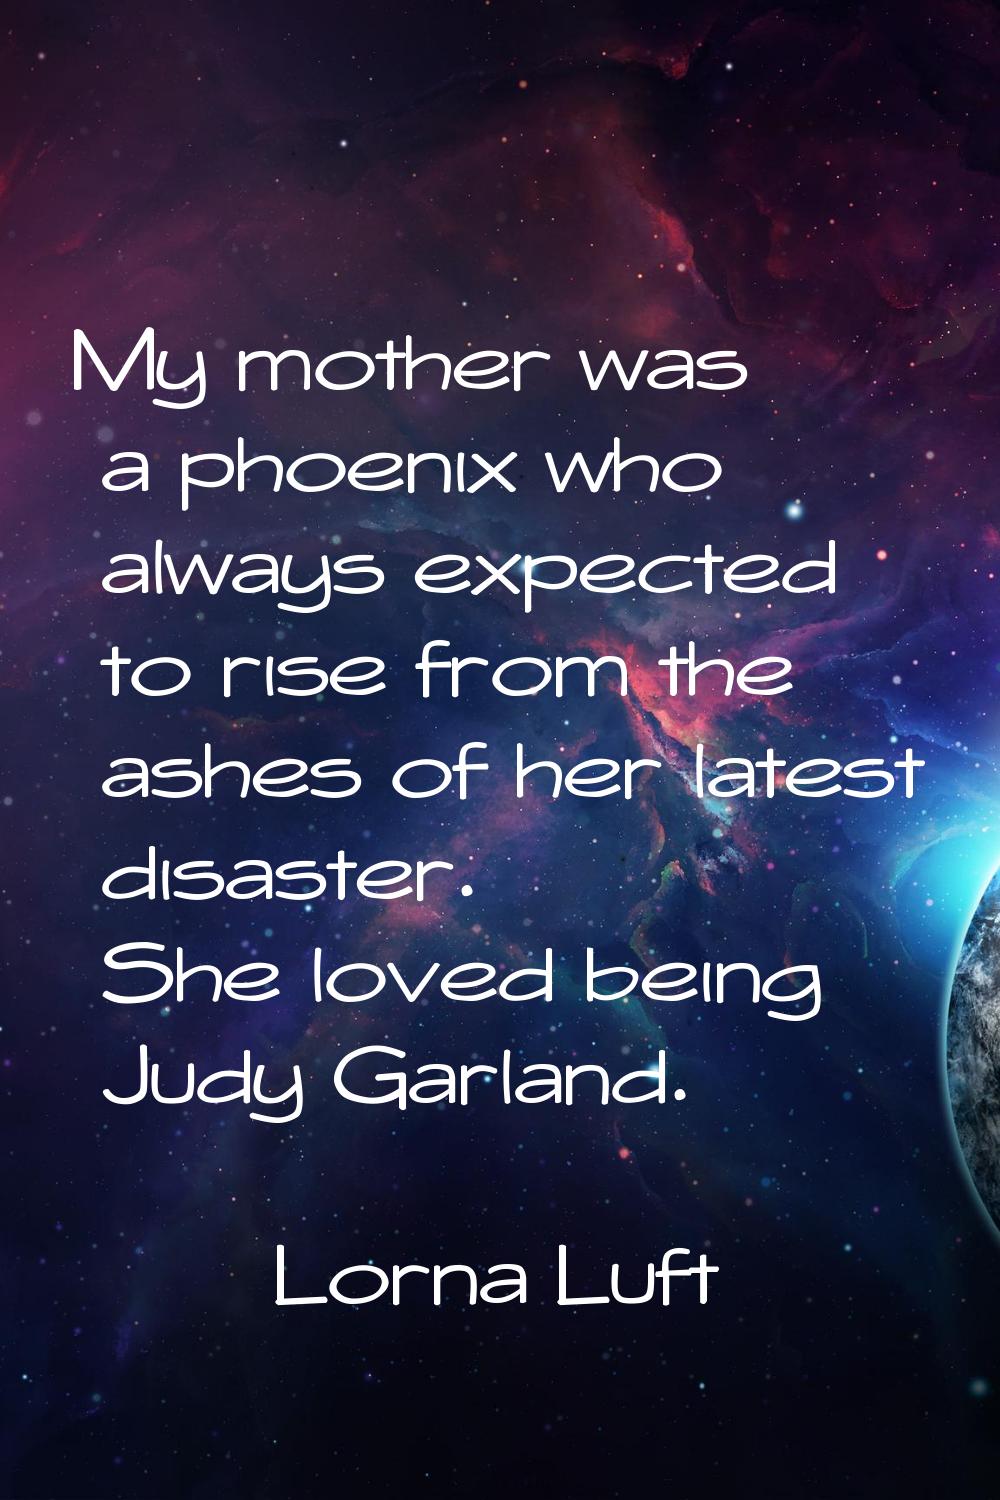 My mother was a phoenix who always expected to rise from the ashes of her latest disaster. She love